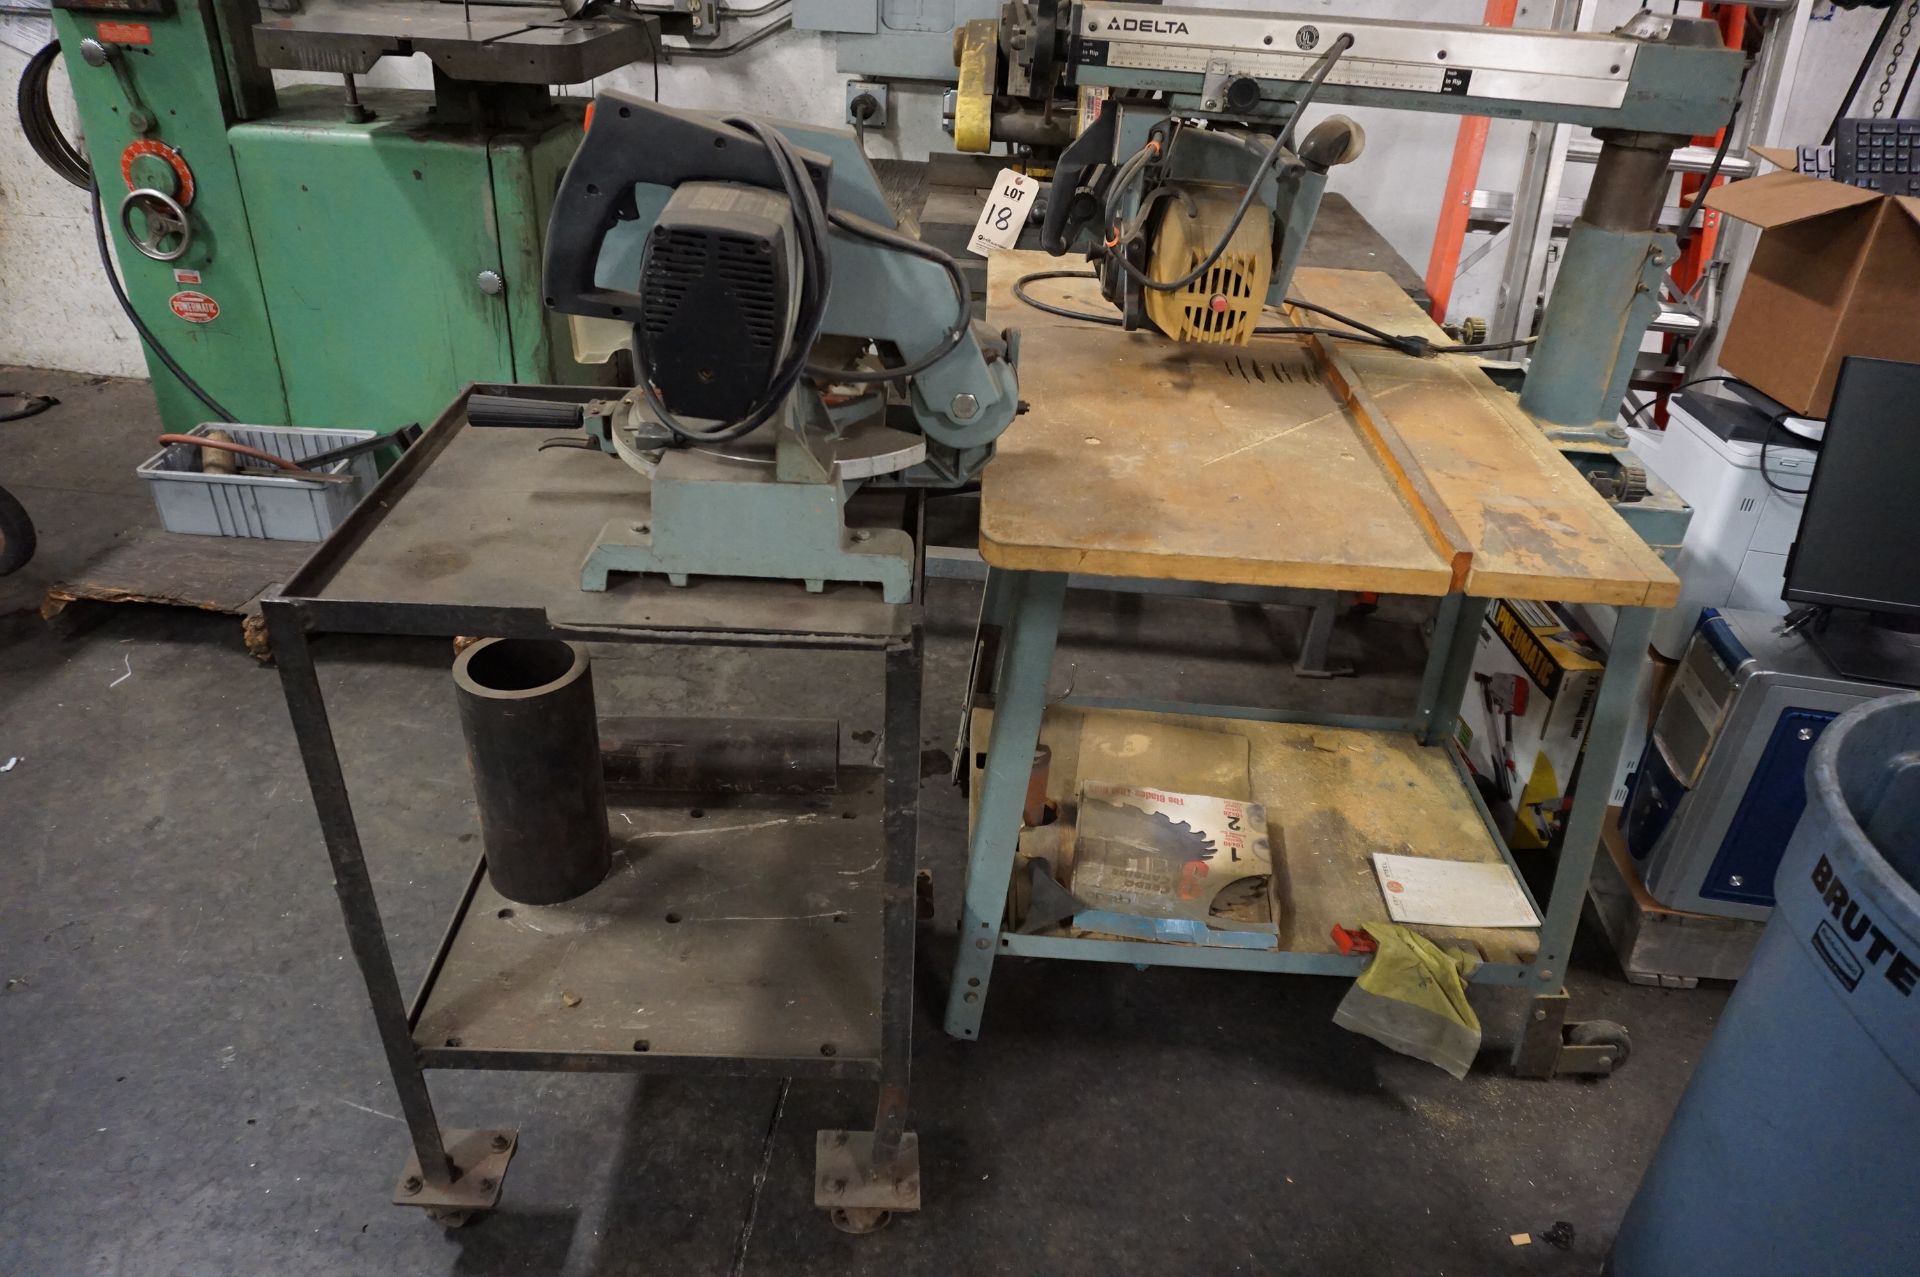 LOT TO INCLUDE: DELTA MODEL 10 RADIAL ARM TABLE SAW, DELTA 10" MITER SAW MODEL 34-080 - Image 3 of 6